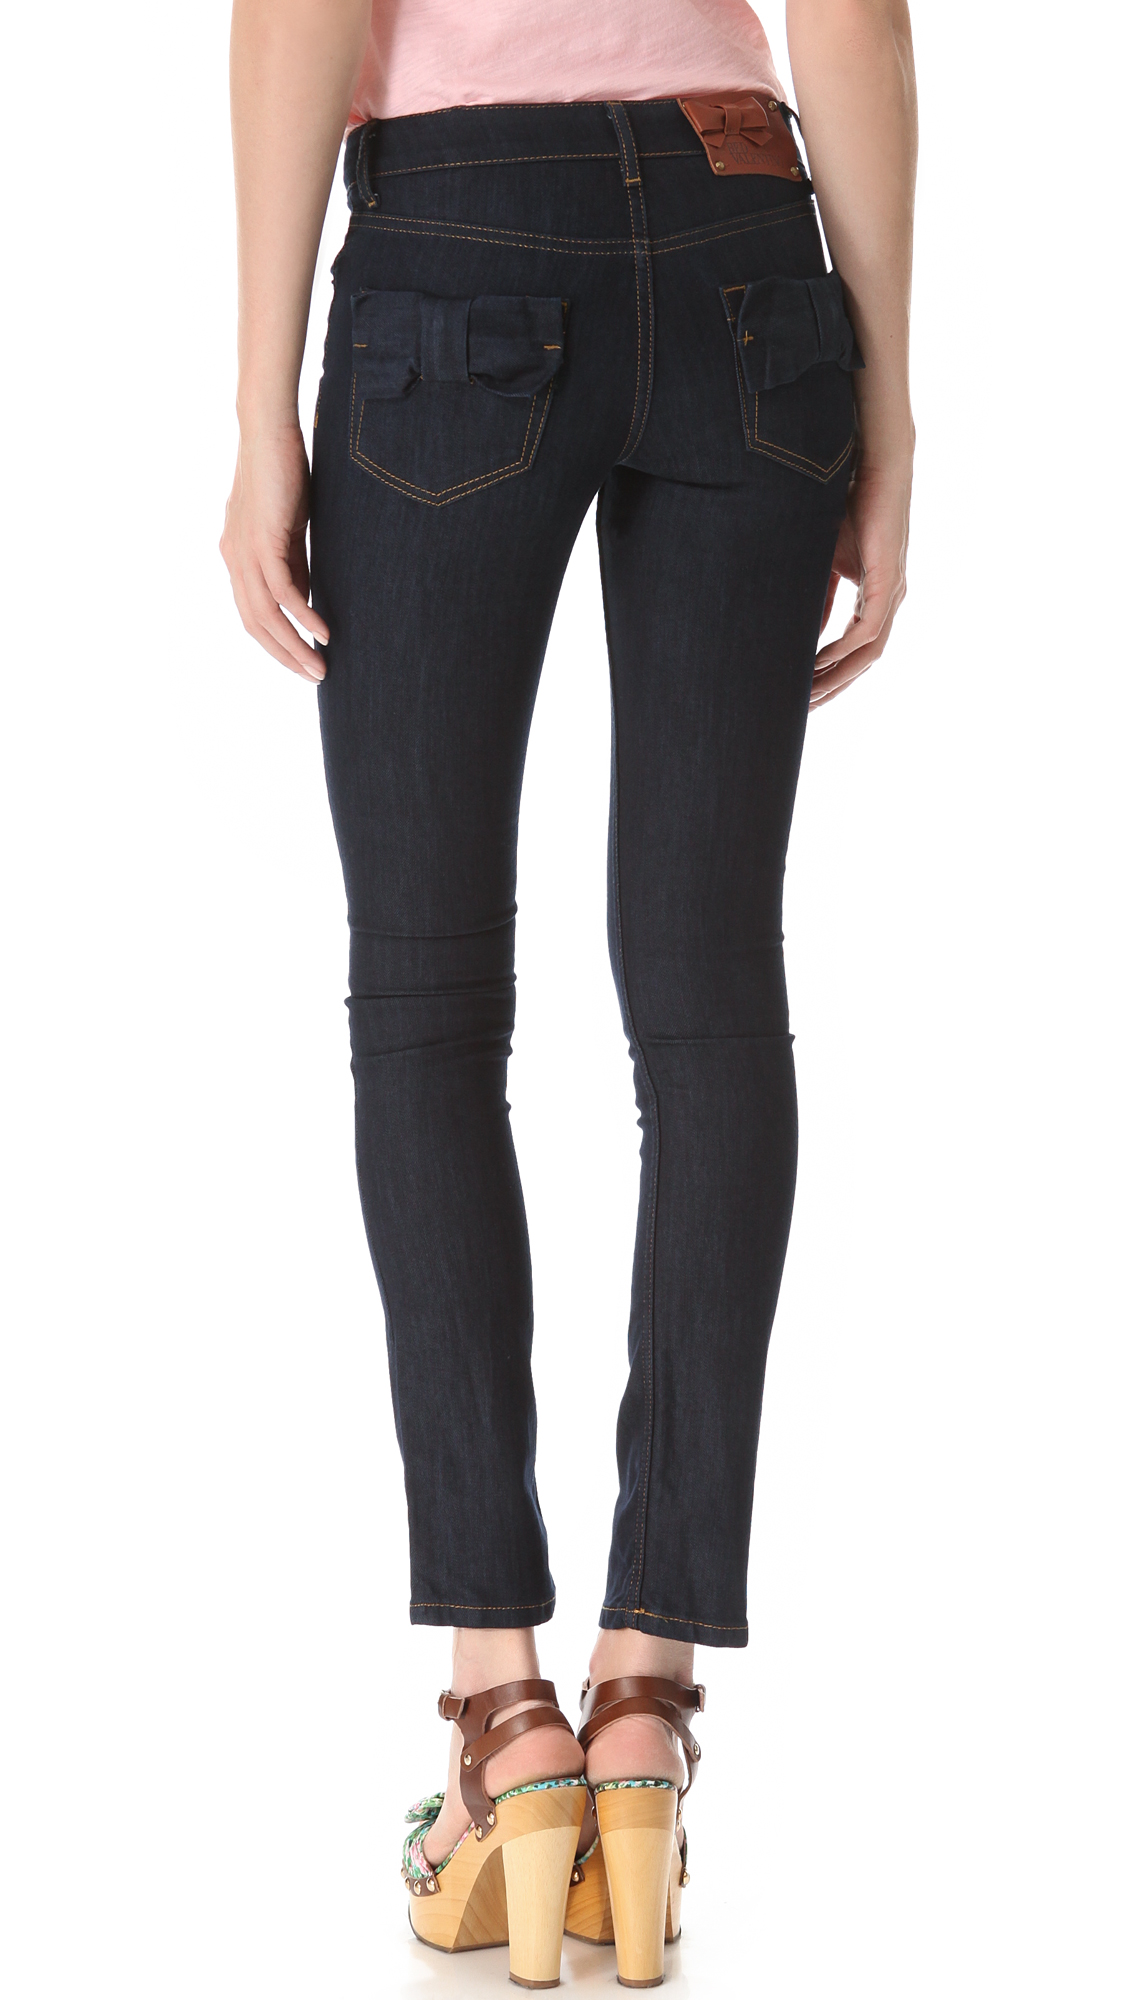 RED Valentino Bow Pocket Jeans in Denim (Blue) - Lyst